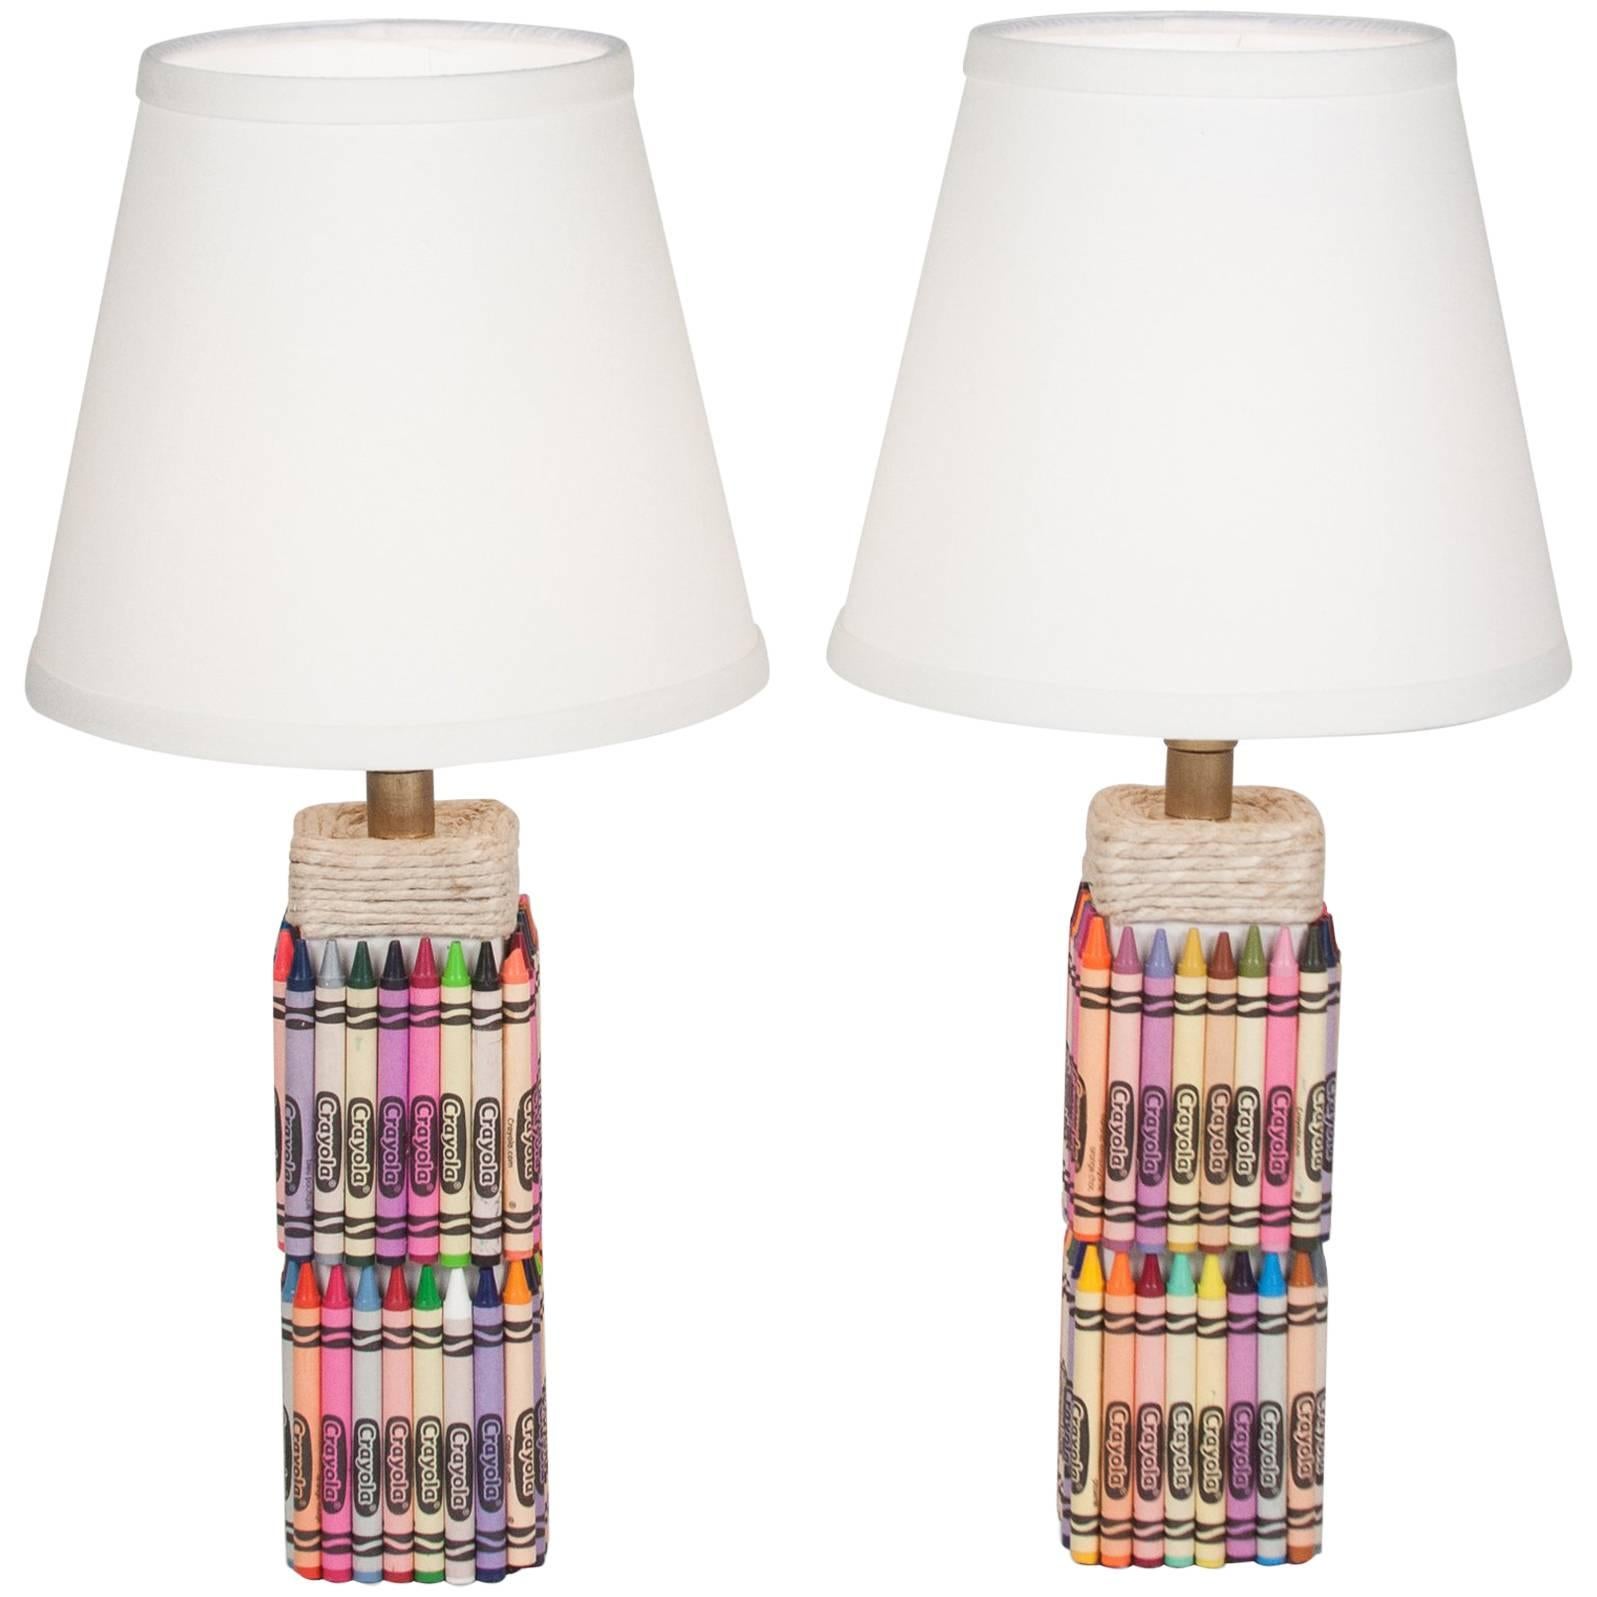 Pair of "Crayola" Table Lamps For Sale